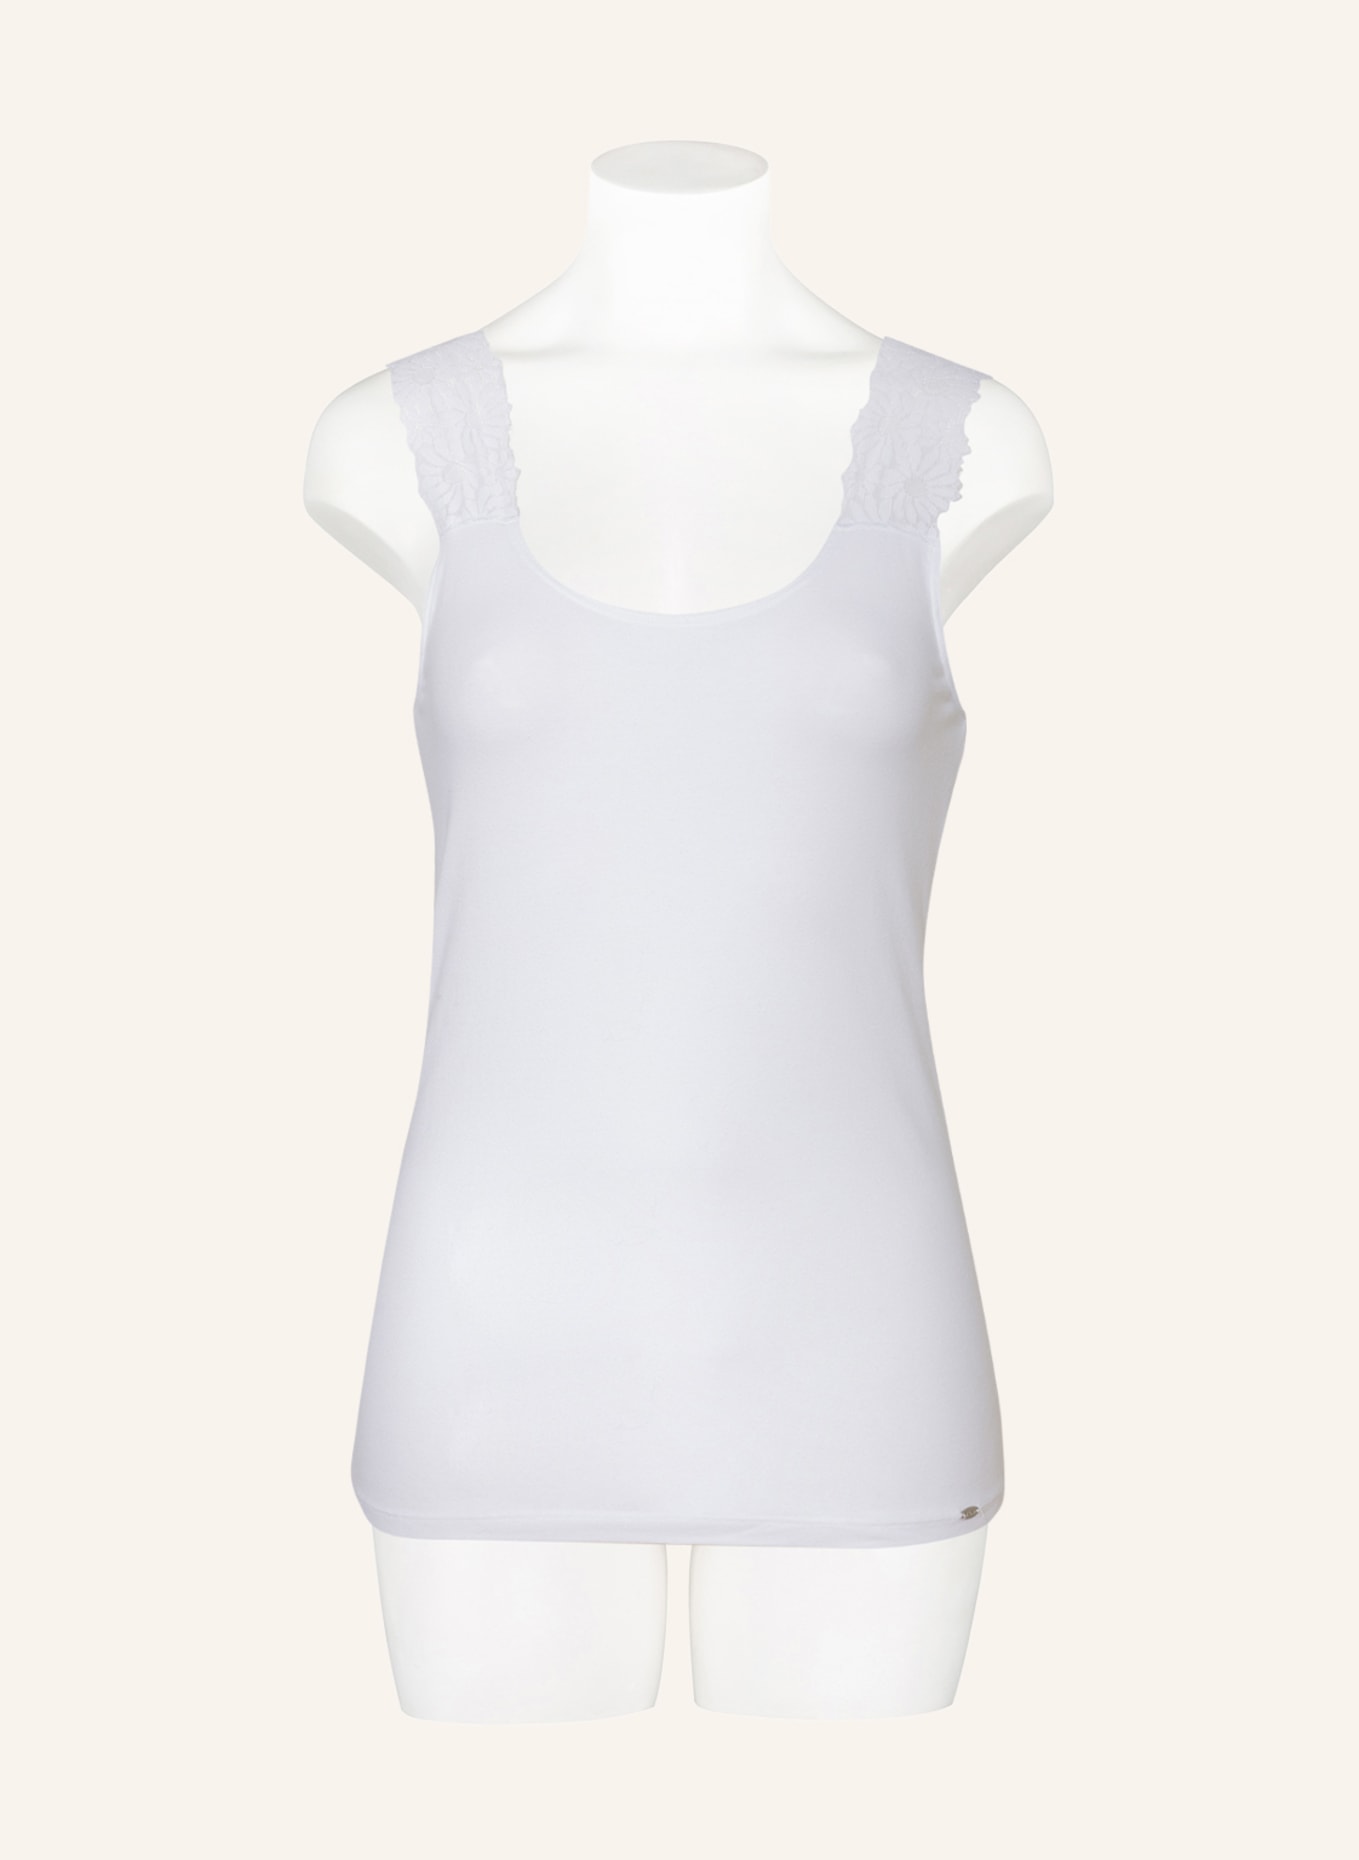 Skiny Top EVERY DAY IN COTTON, Farbe: WEISS (Bild 2)